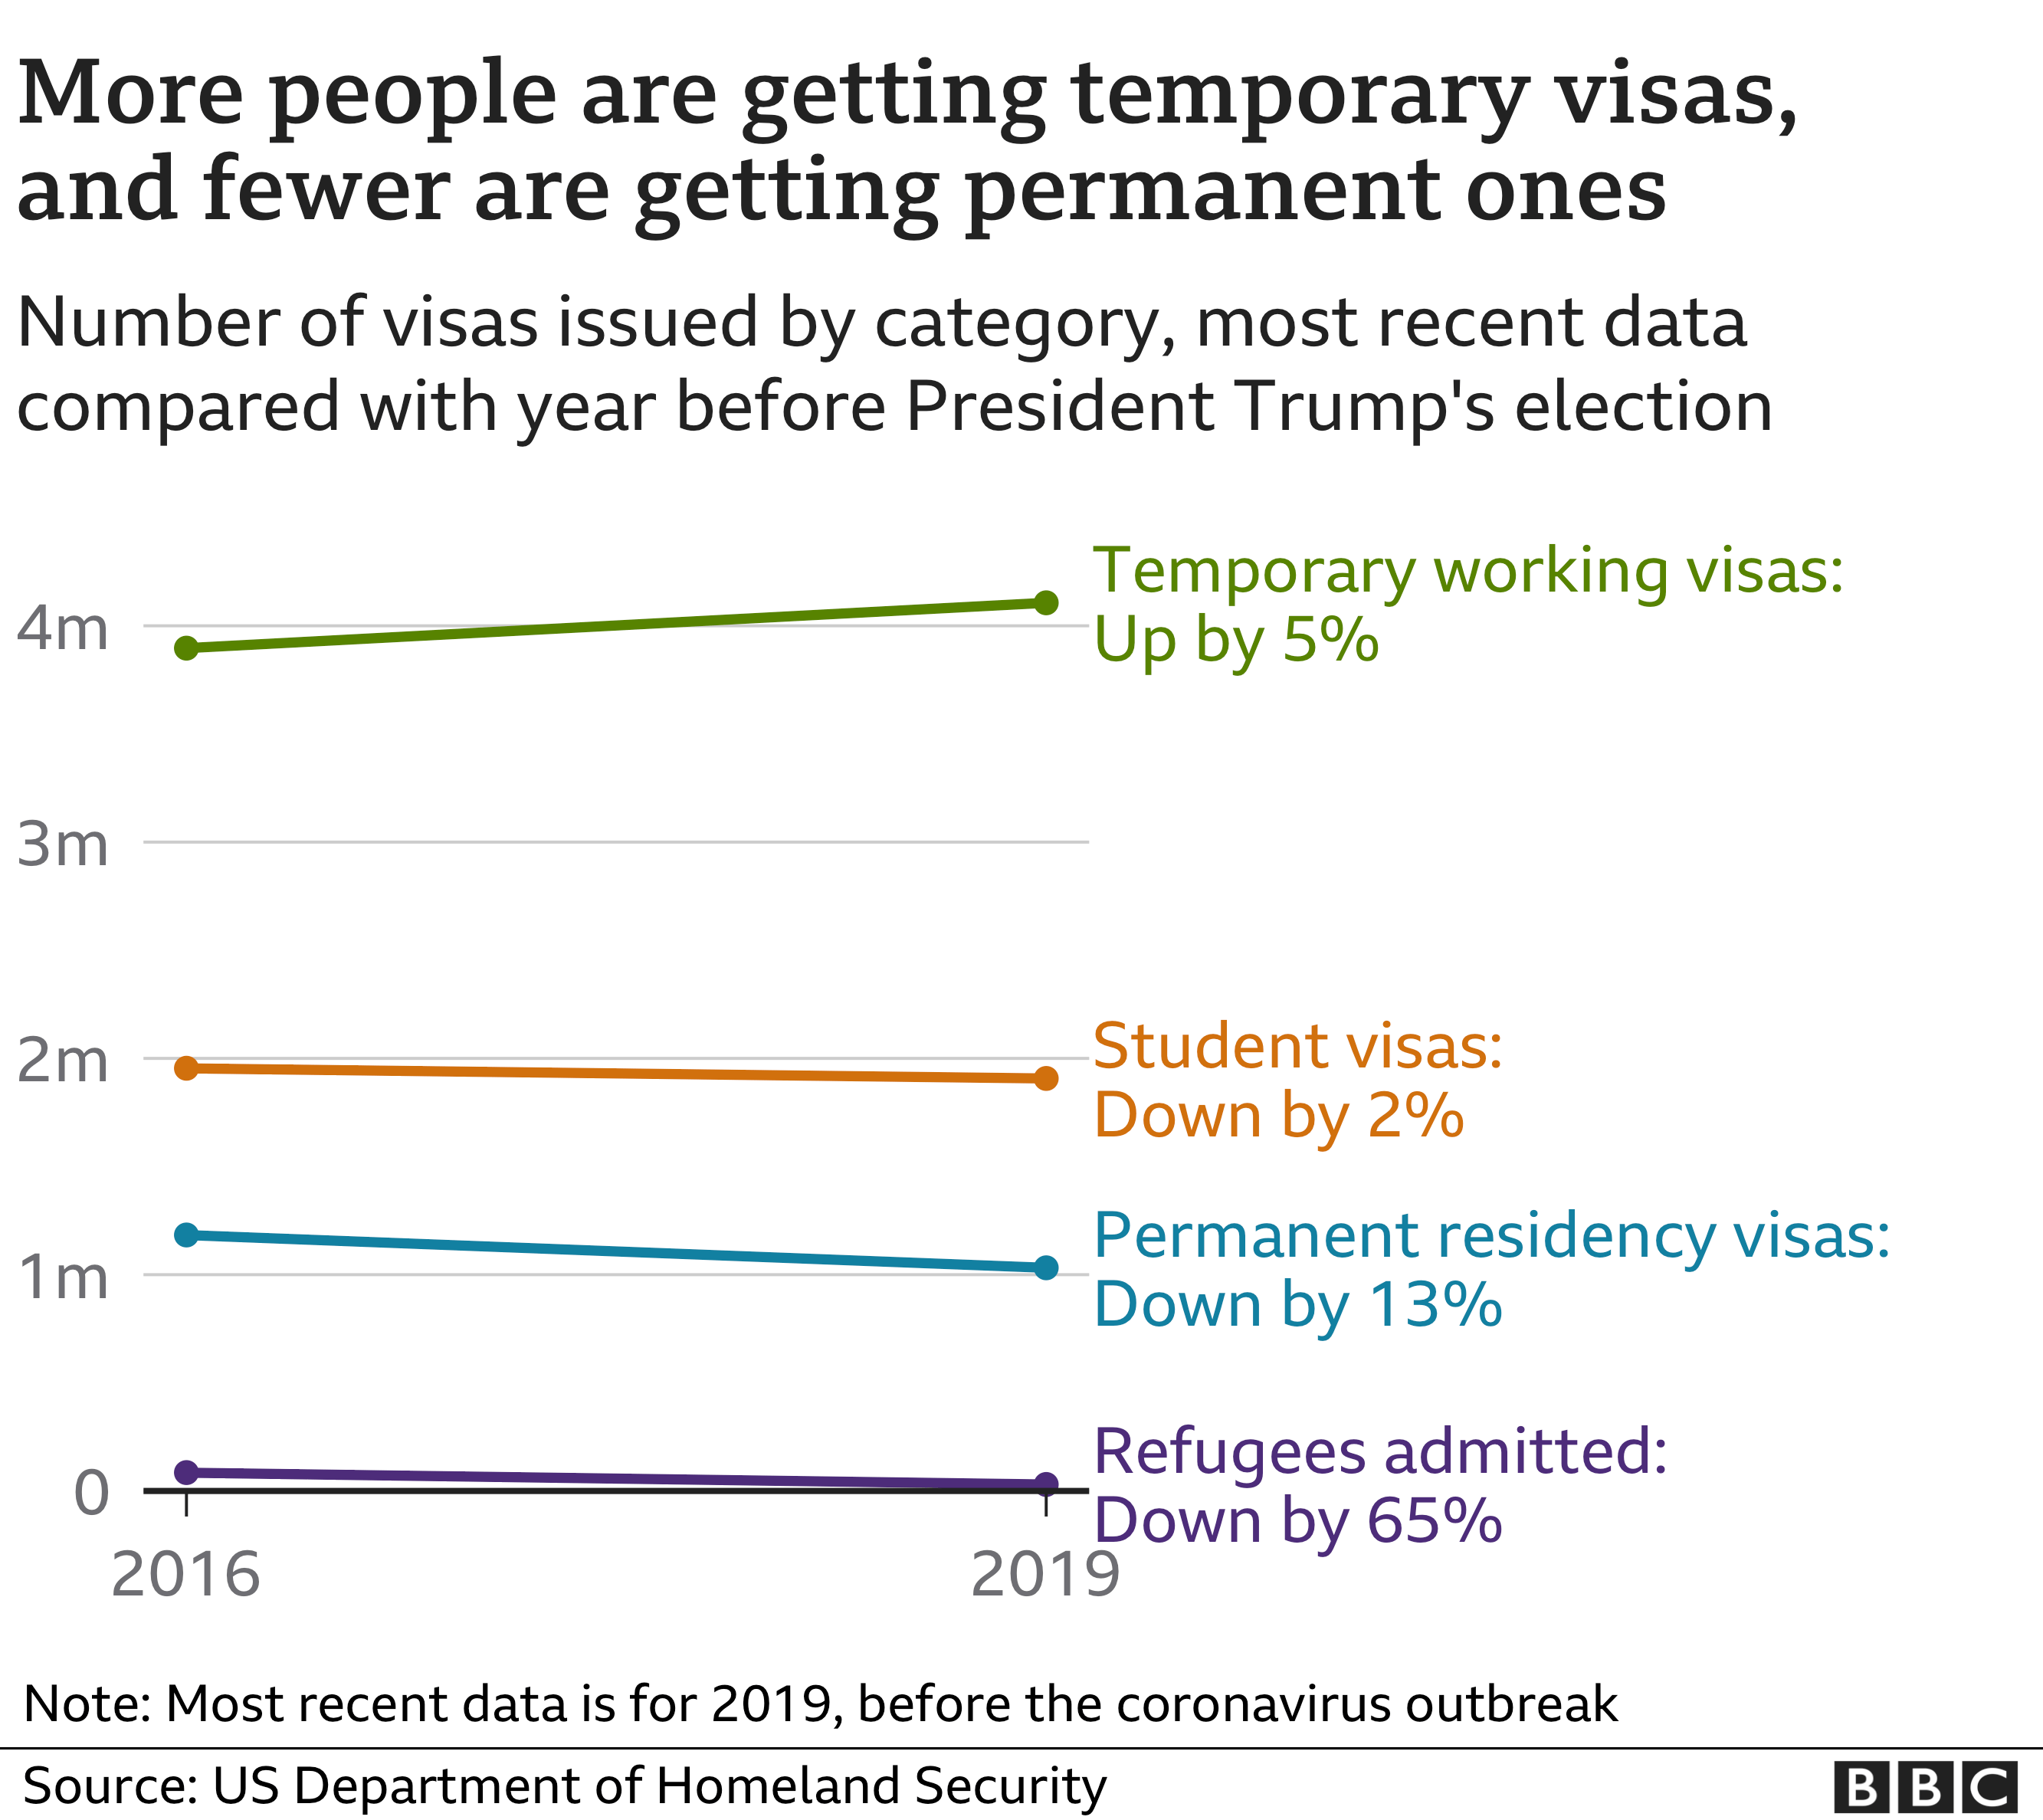 More people are getting temporary visas, and fewer are getting permanent ones